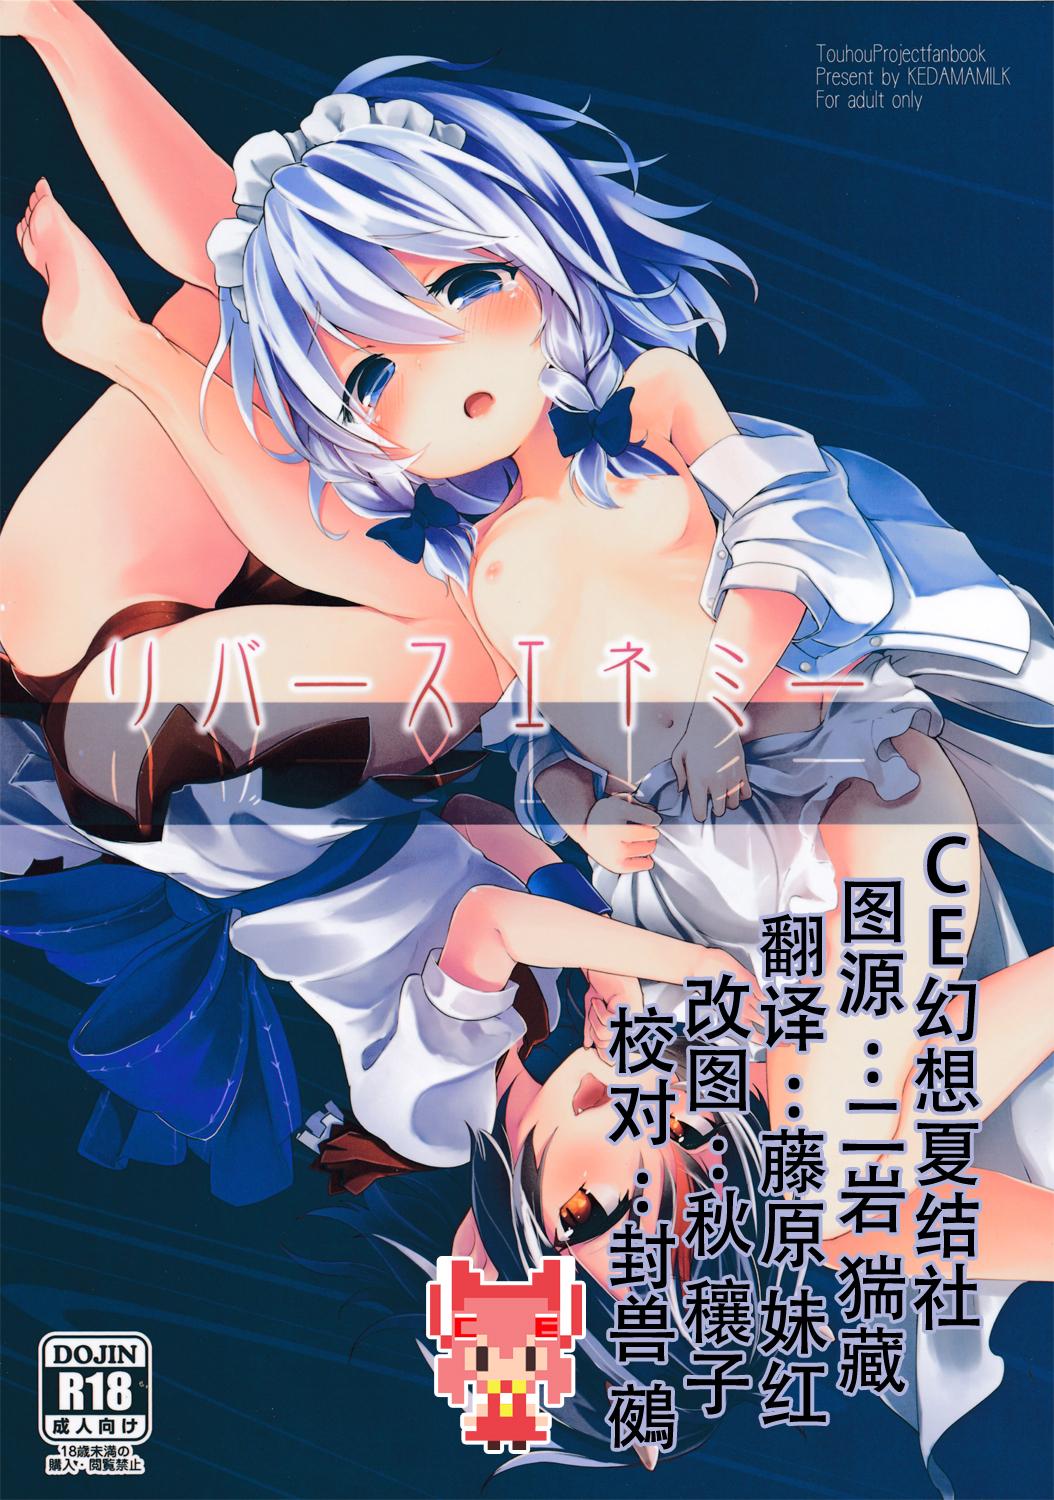 Hot Girl Pussy Reverse Enemy - Touhou project Zorra - Picture 1